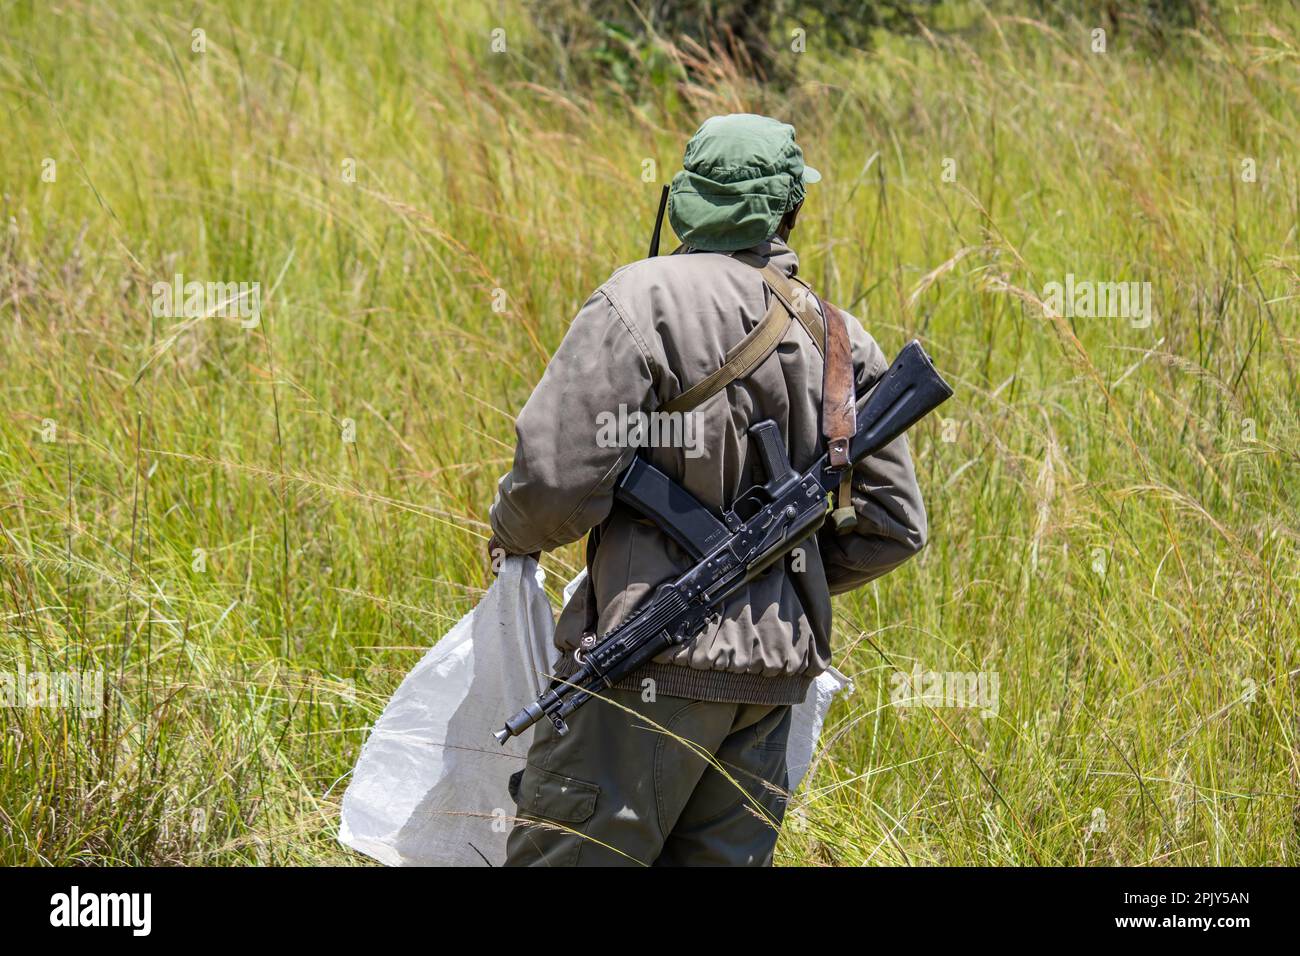 Rangers armed with guns in animal conservation park in Zimbabwe, in Imire Rhino & Wildlife Conservancy Stock Photo